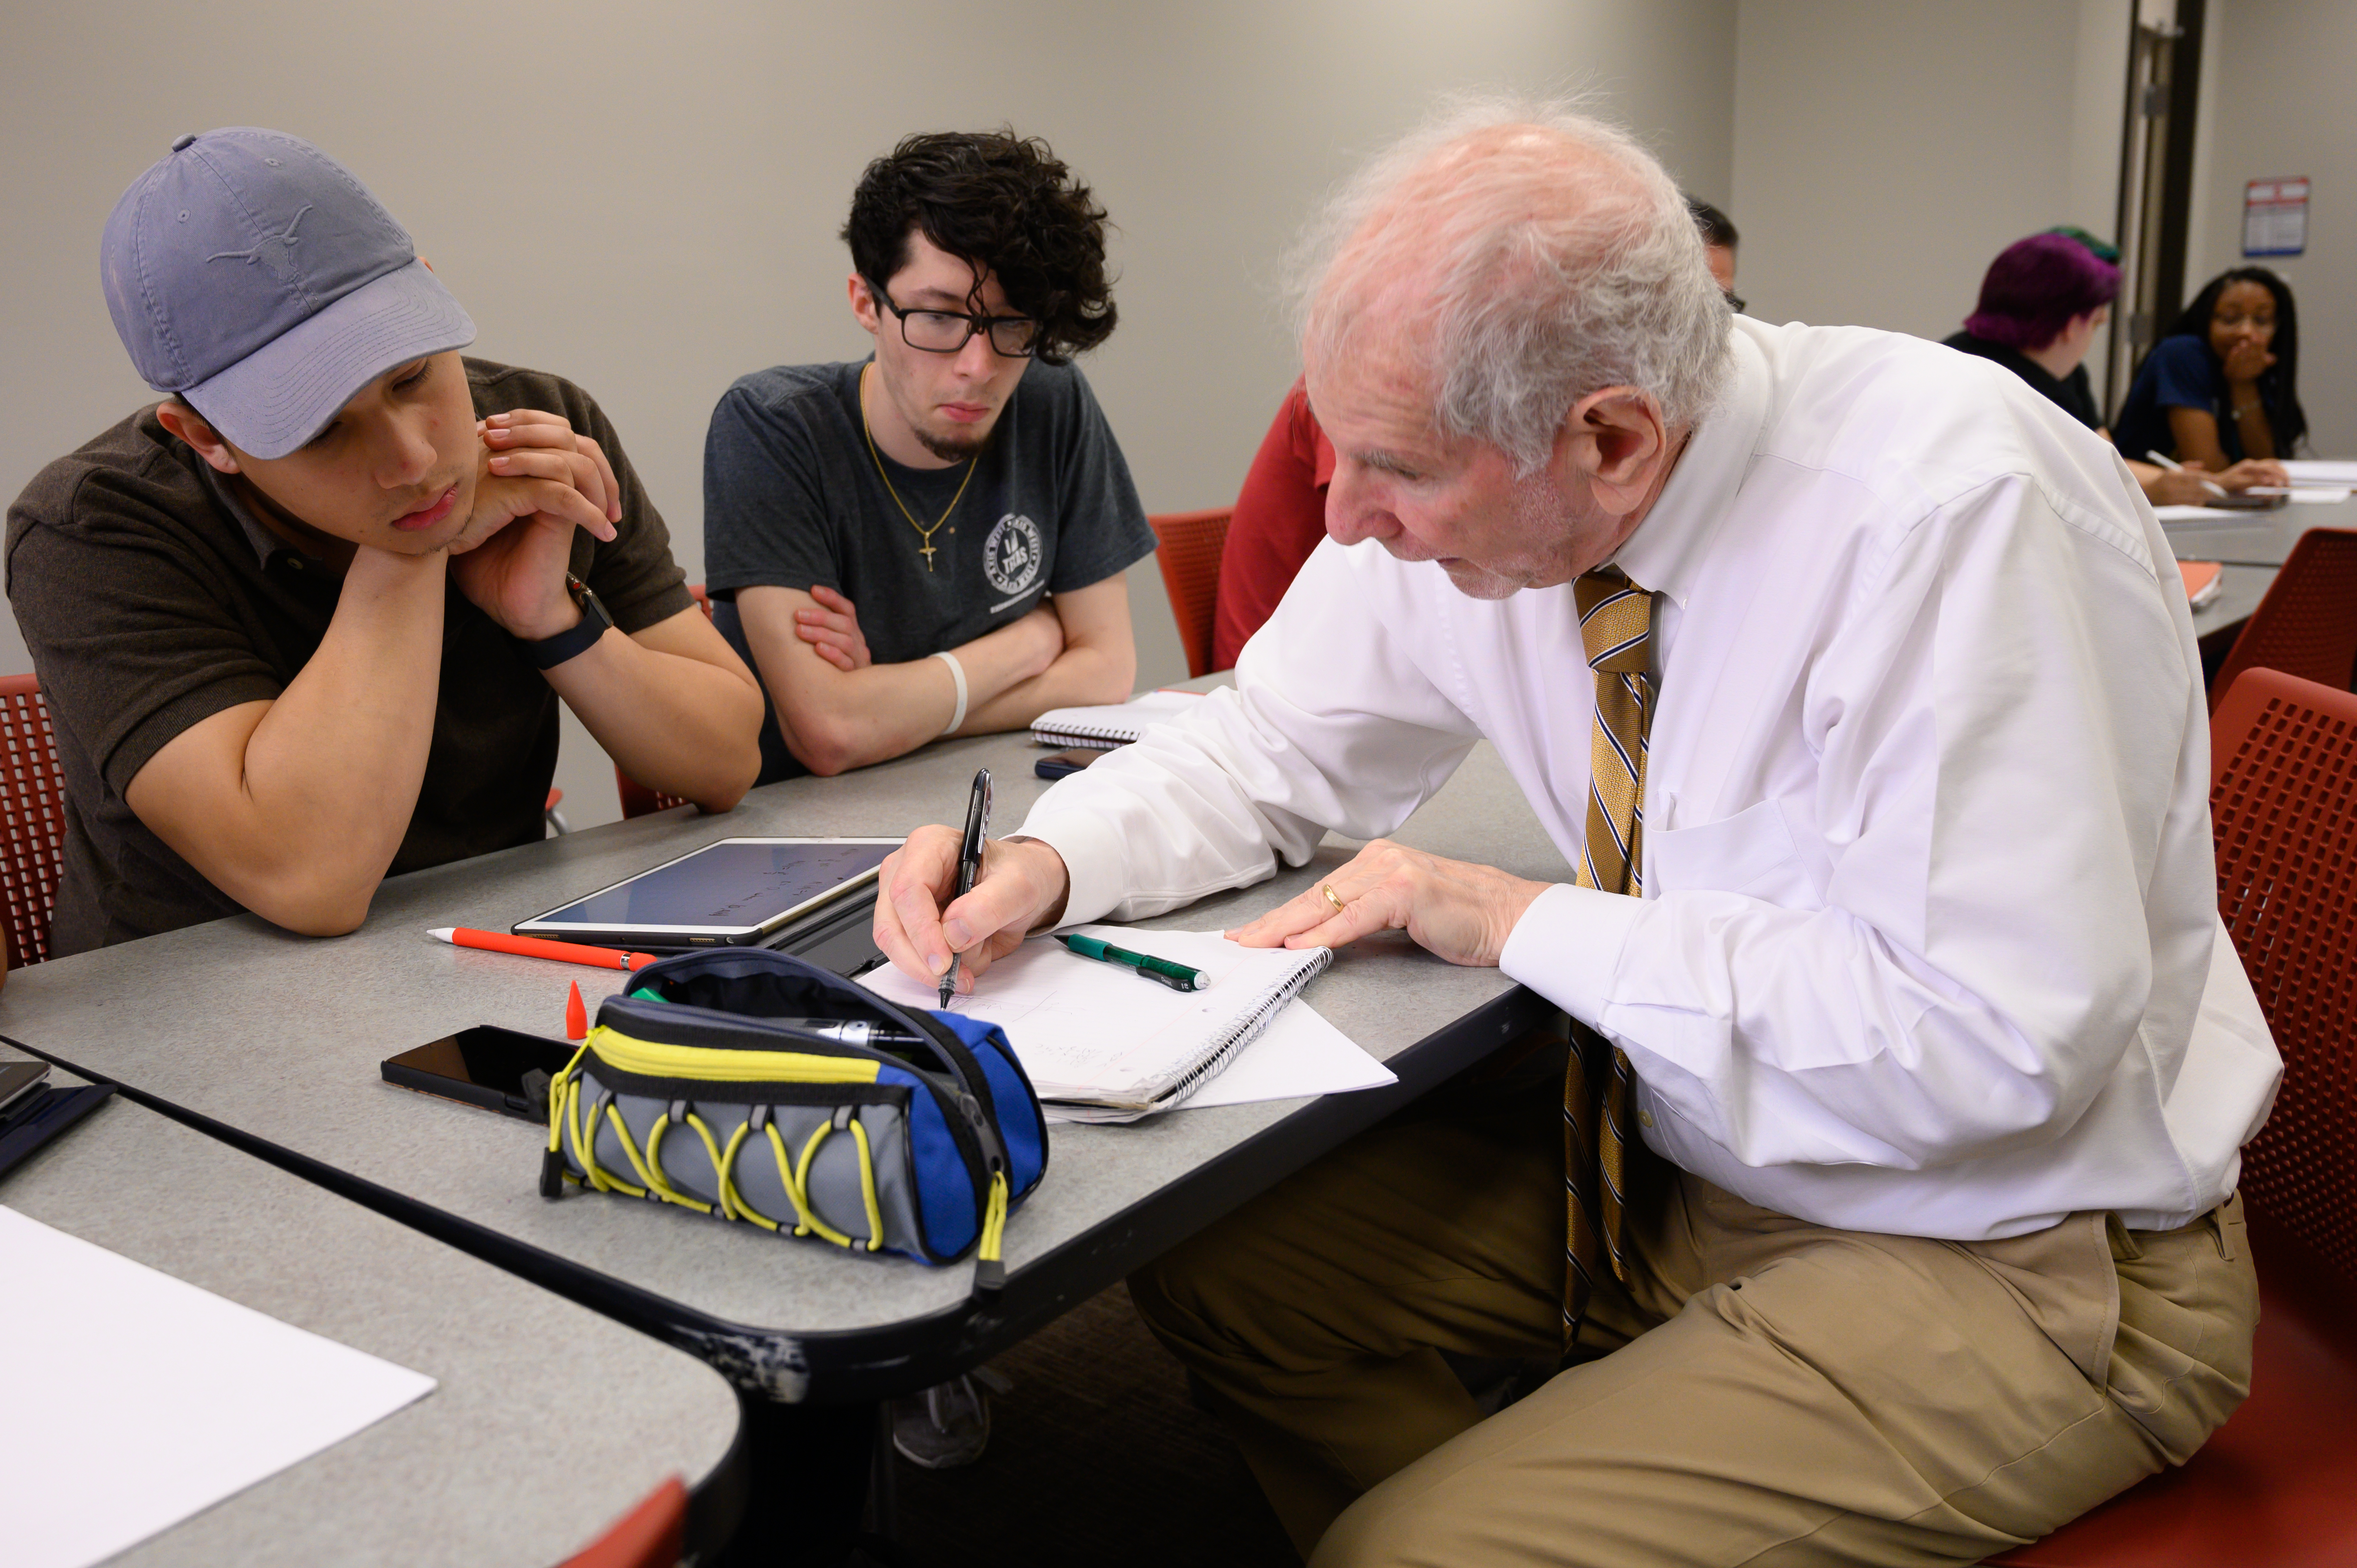 Treisman working in class with his calculus students.